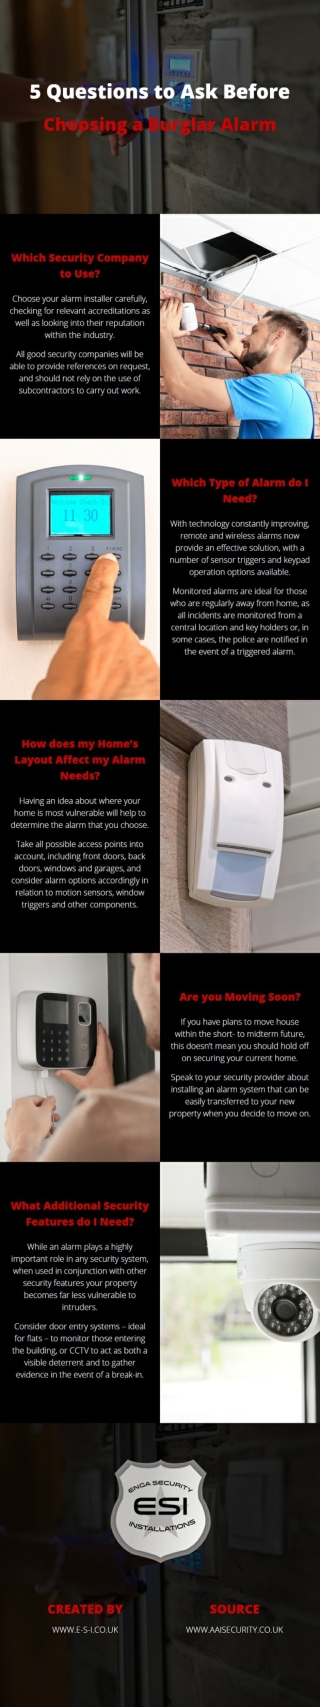 5 Questions to Ask Before Choosing a Burglar Alarm